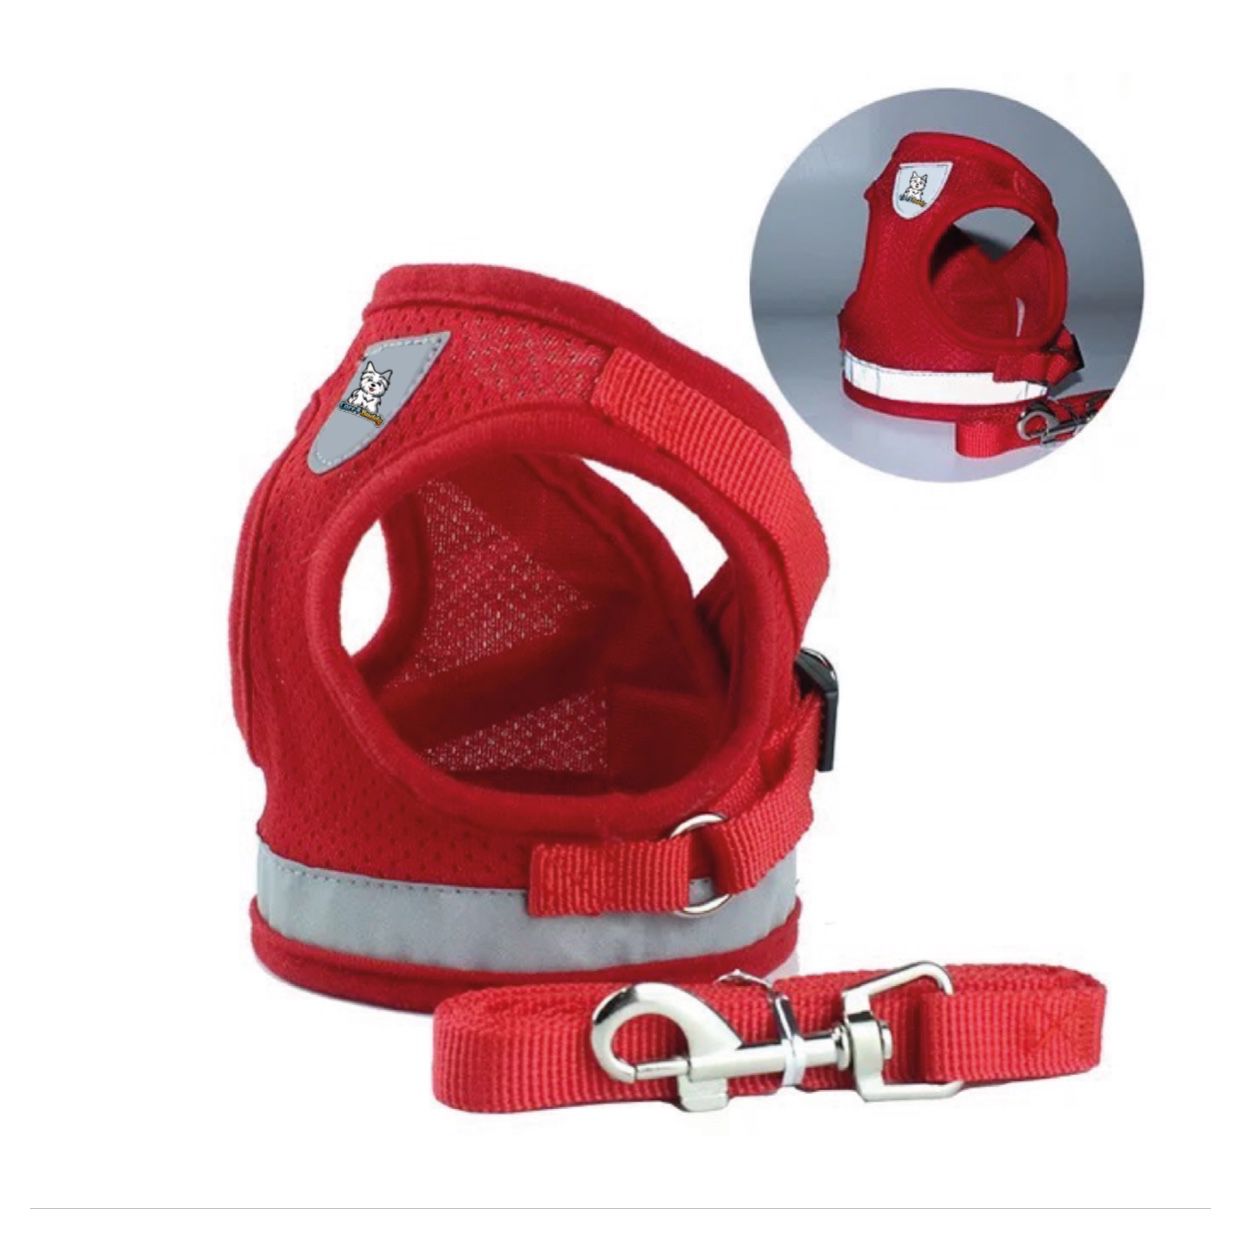 Pet Reflective Harness Adjustable Soft and Comfortable For Your Dog and Cat   